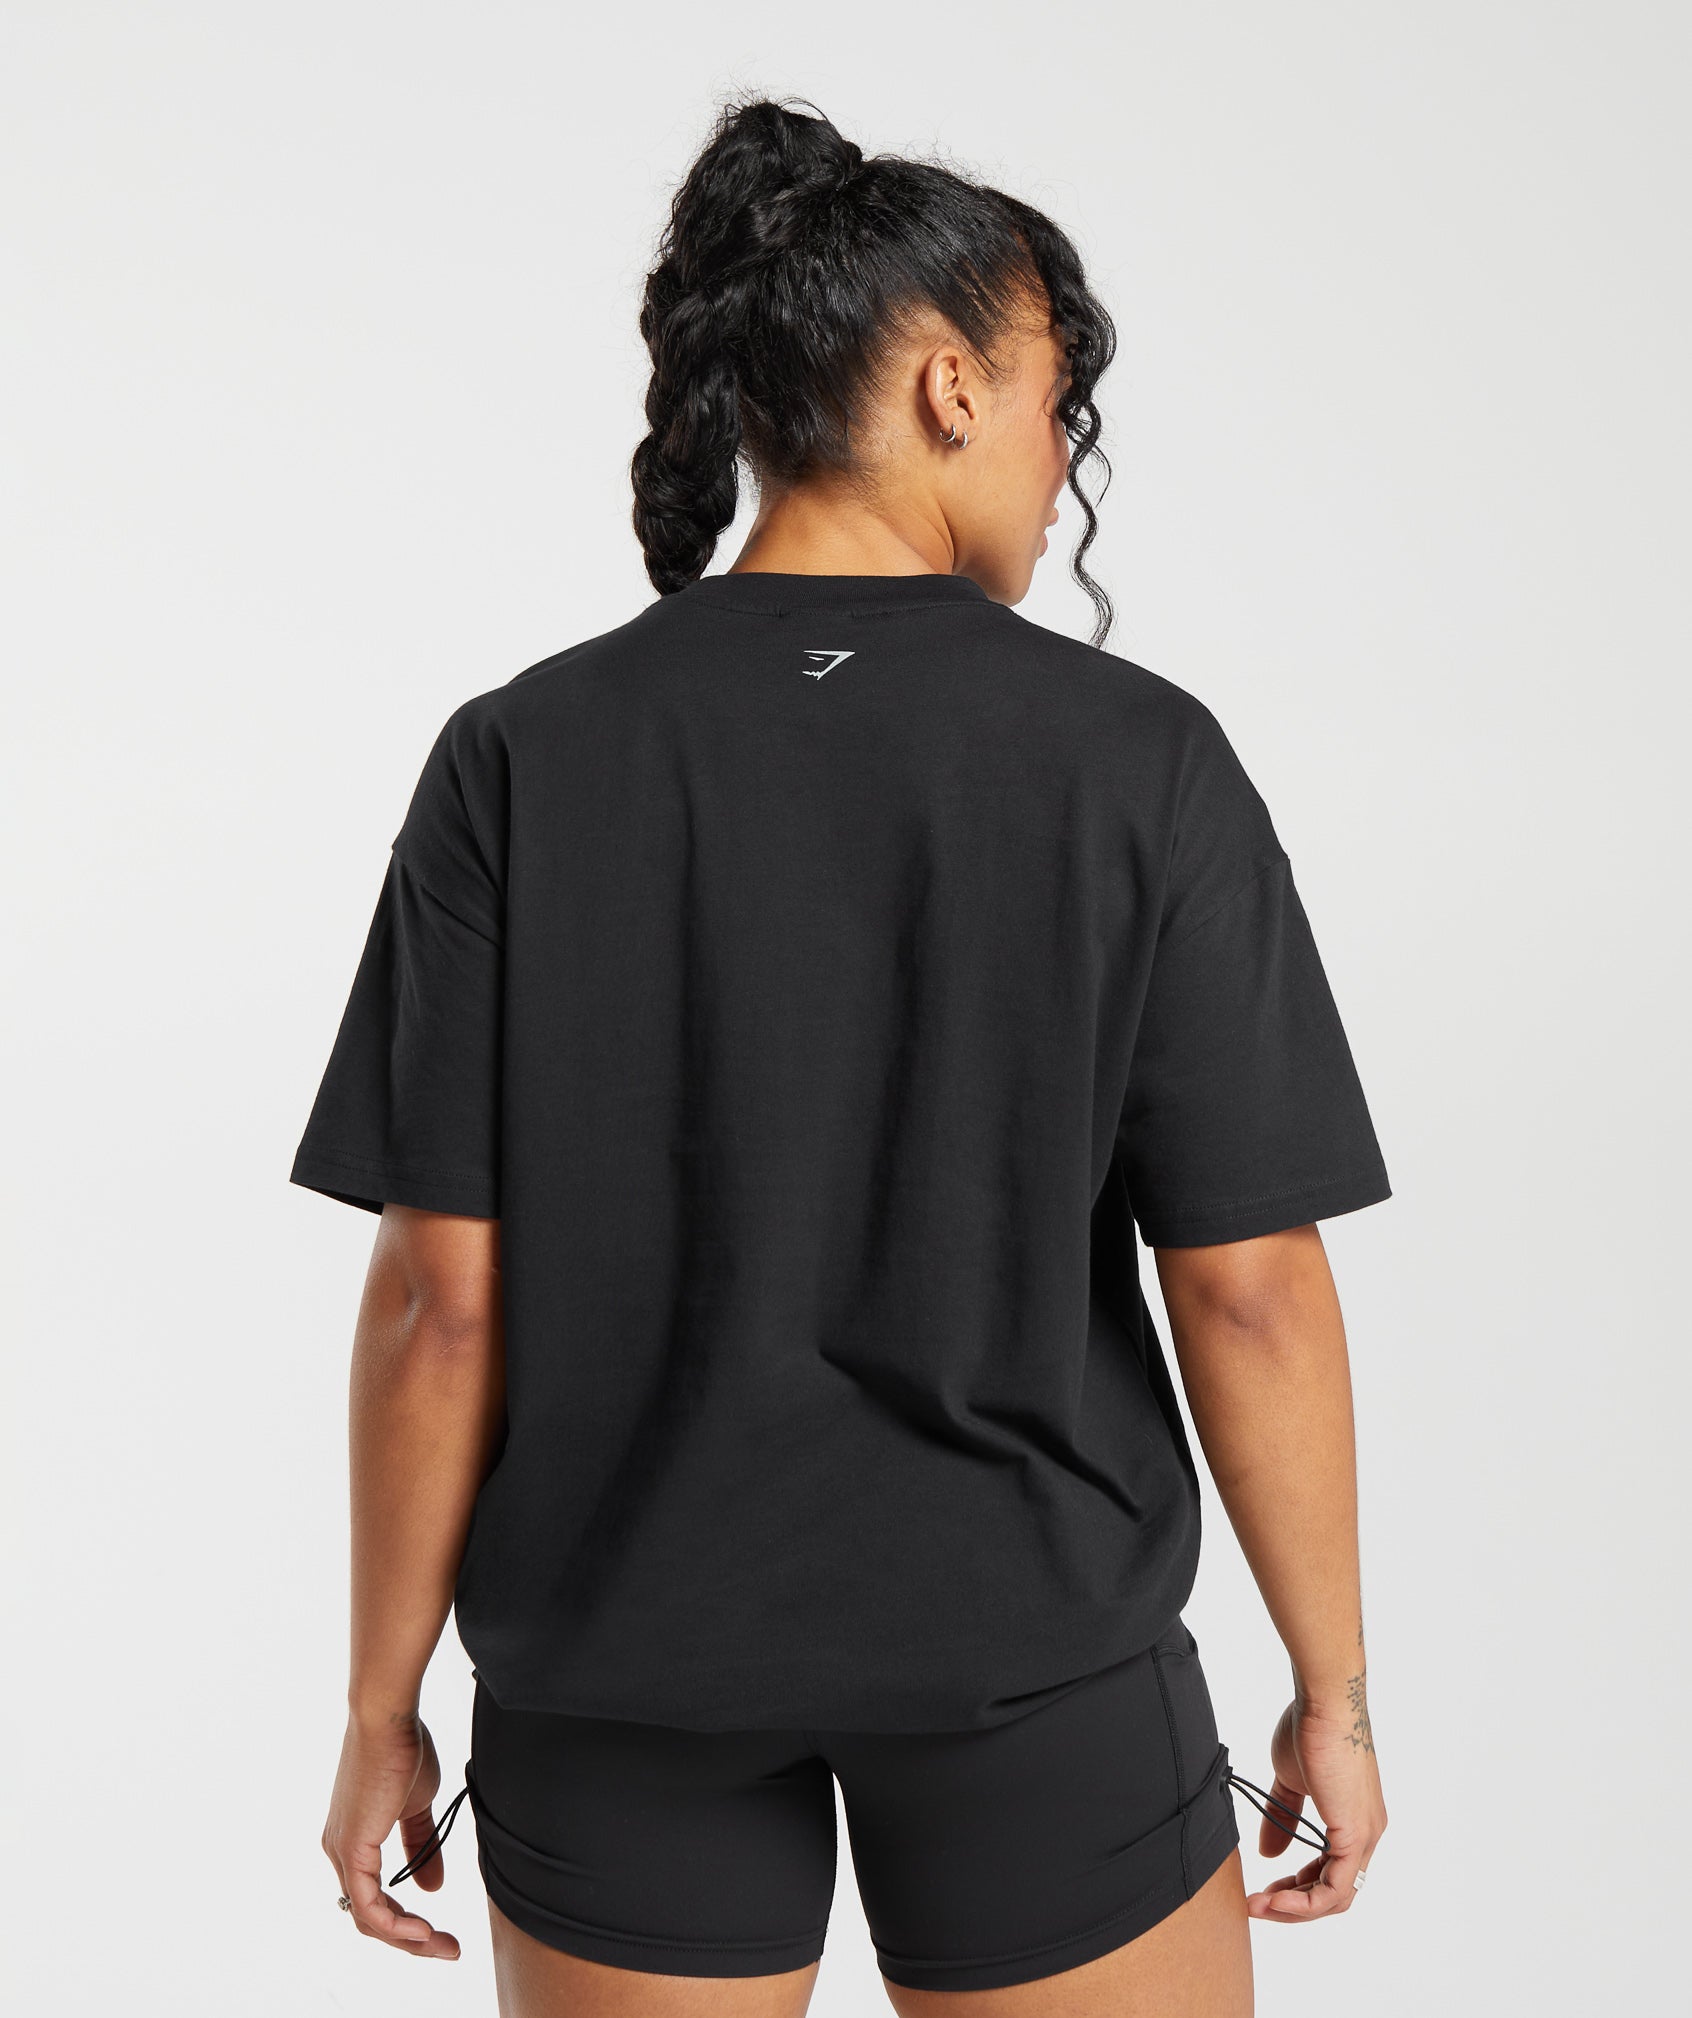 Lifting Apparel Oversized T-Shirt in Black - view 2